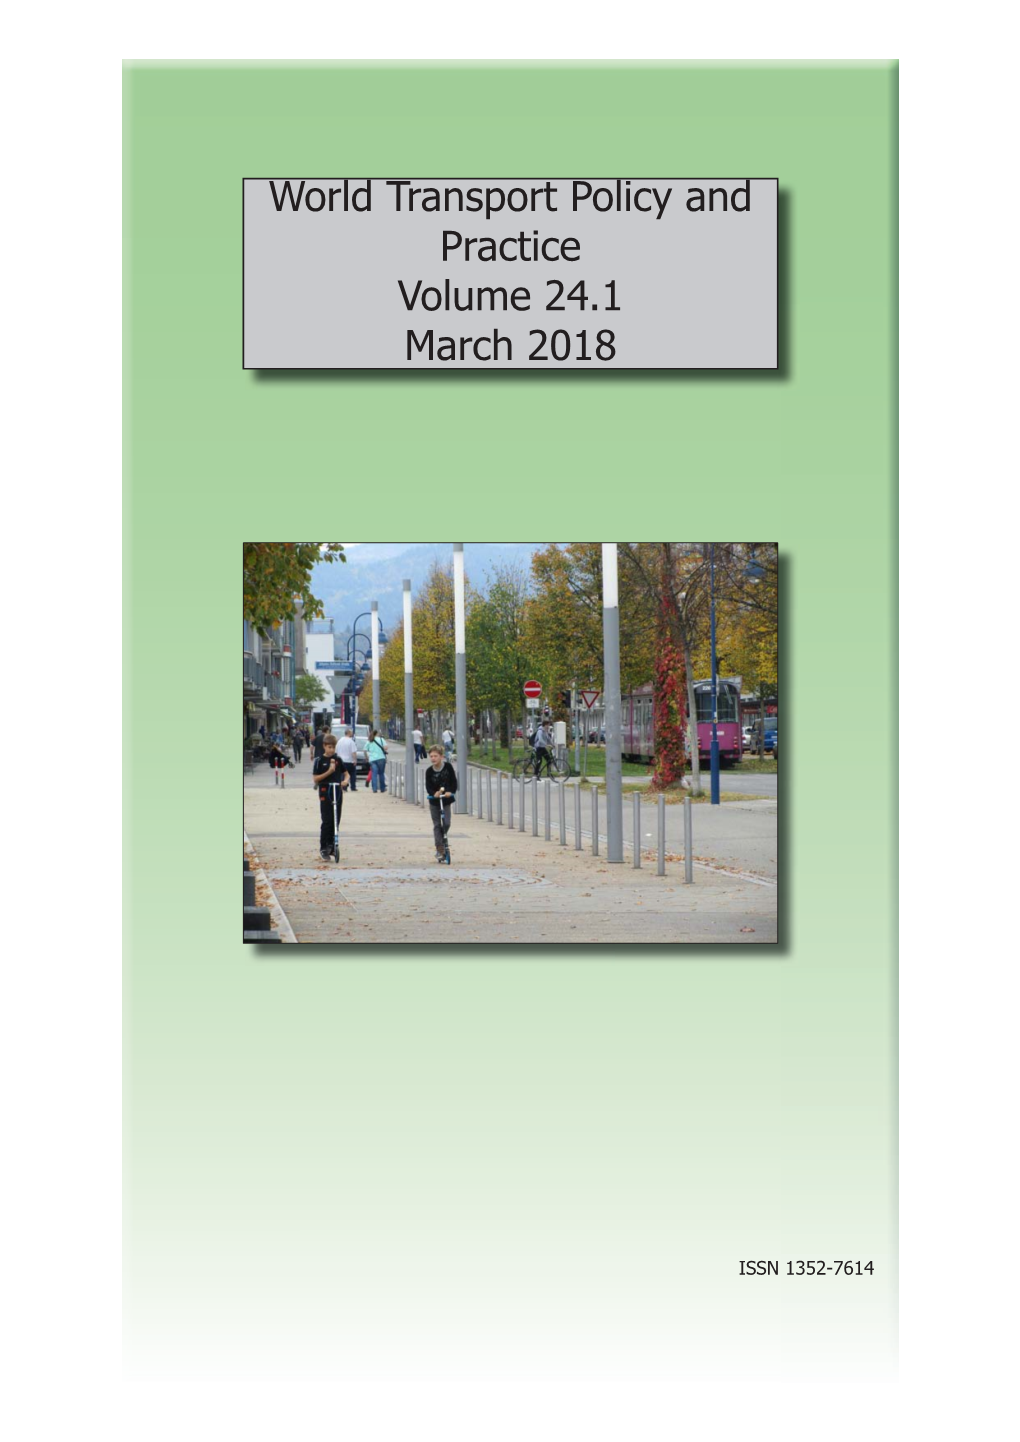 World Transport Policy and Practice Volume 24.1 March 2018